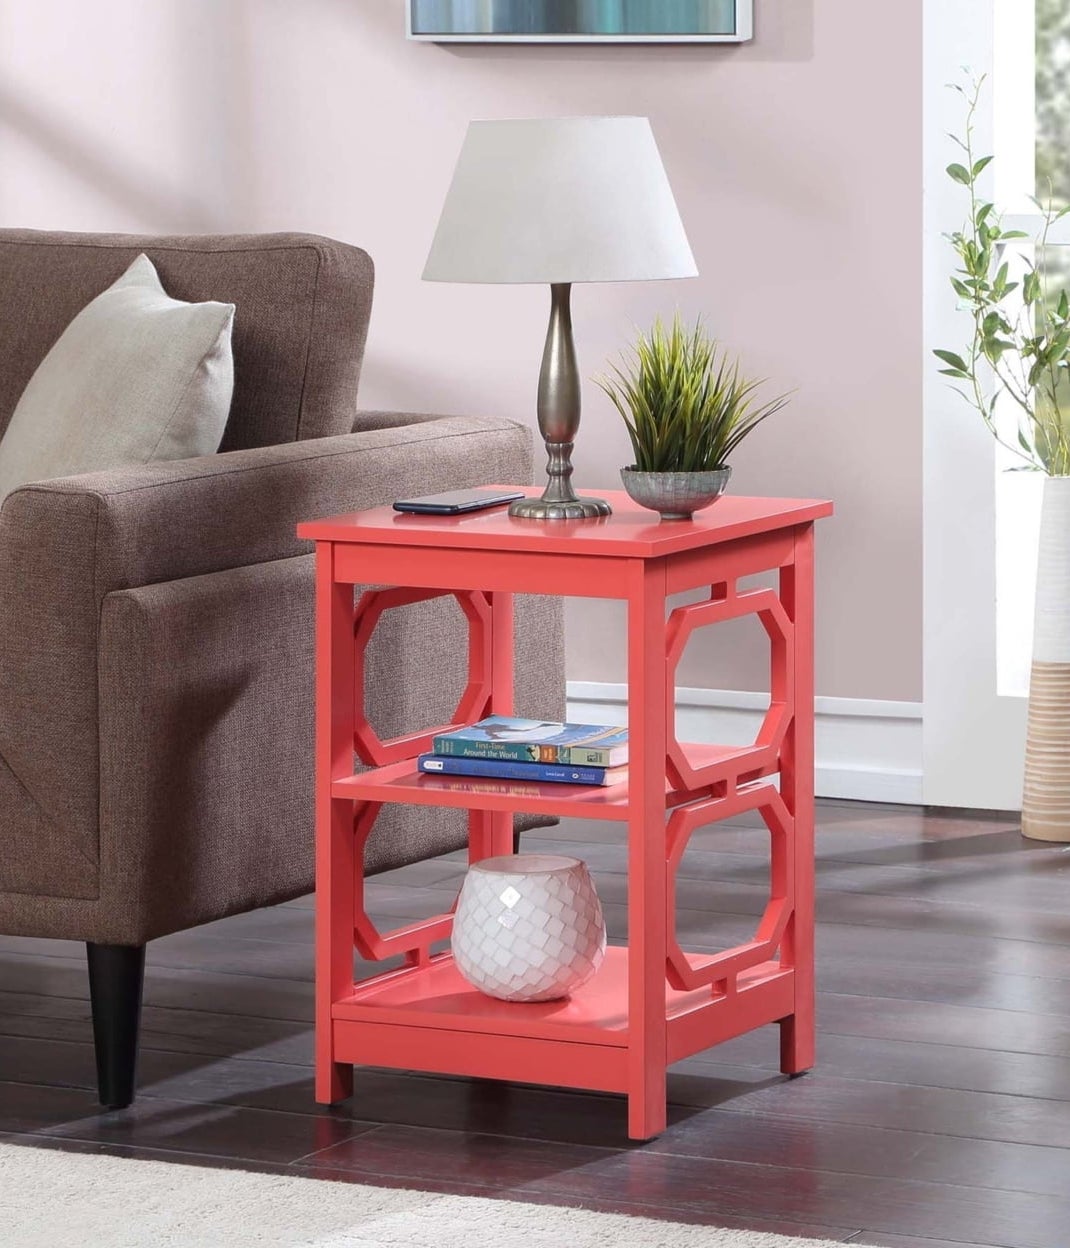 the coral nightstand